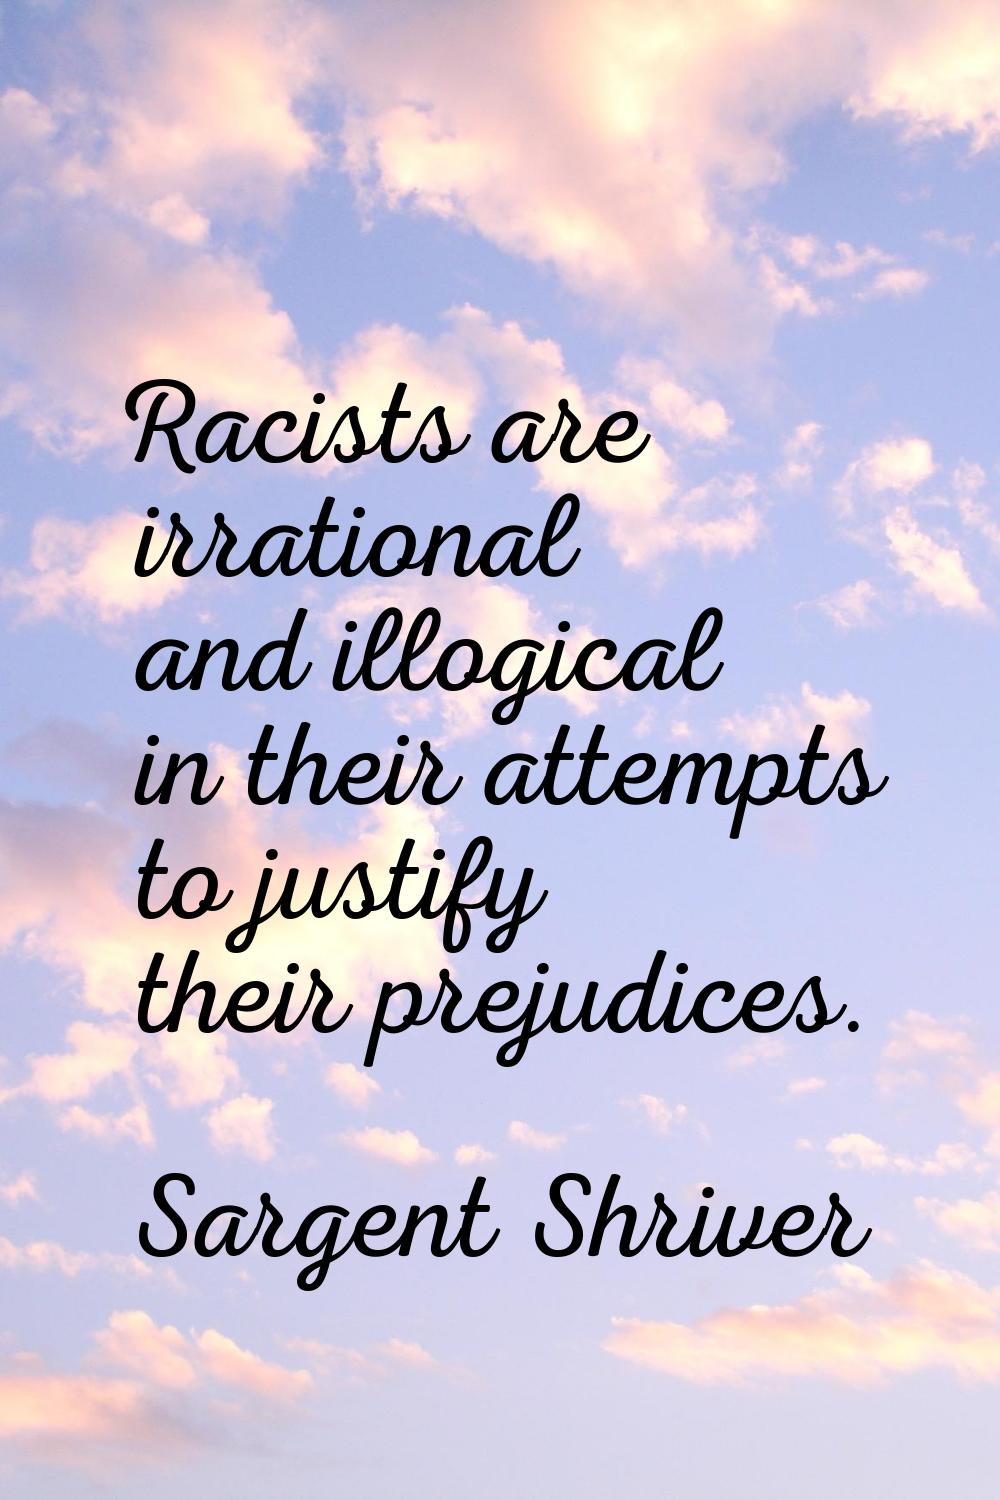 Racists are irrational and illogical in their attempts to justify their prejudices.